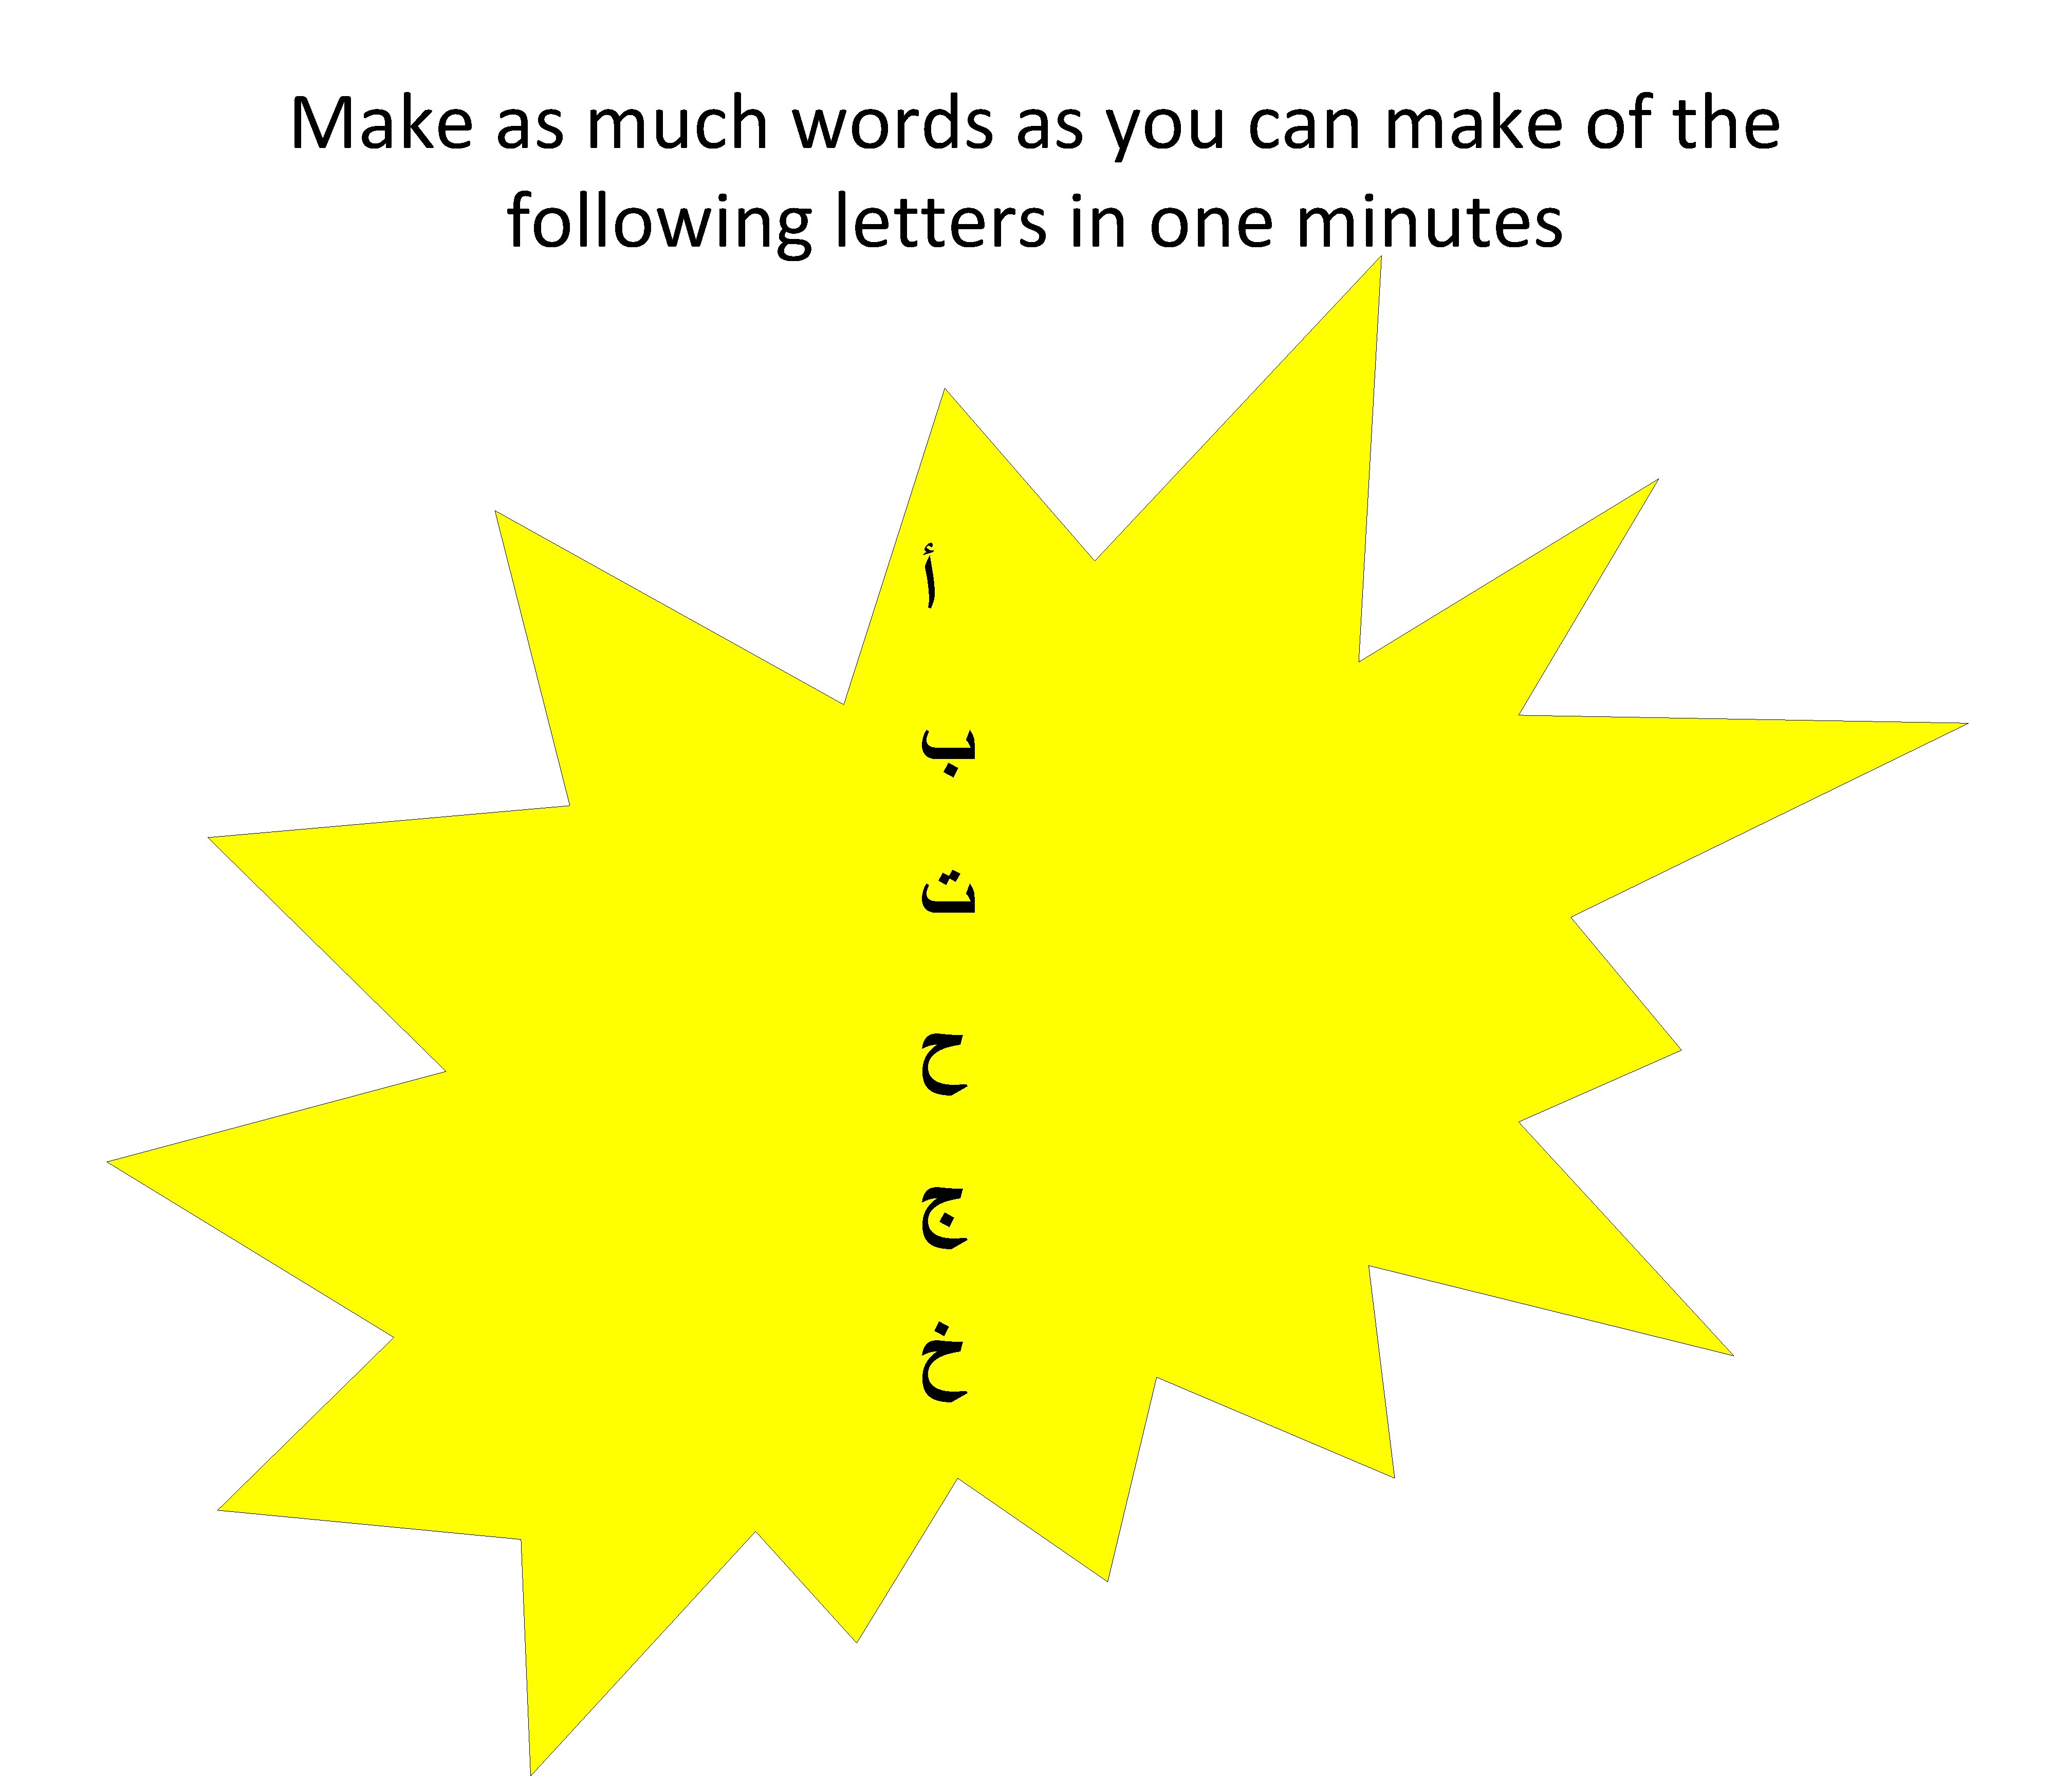 Make as much words as you can make of the following letters in one